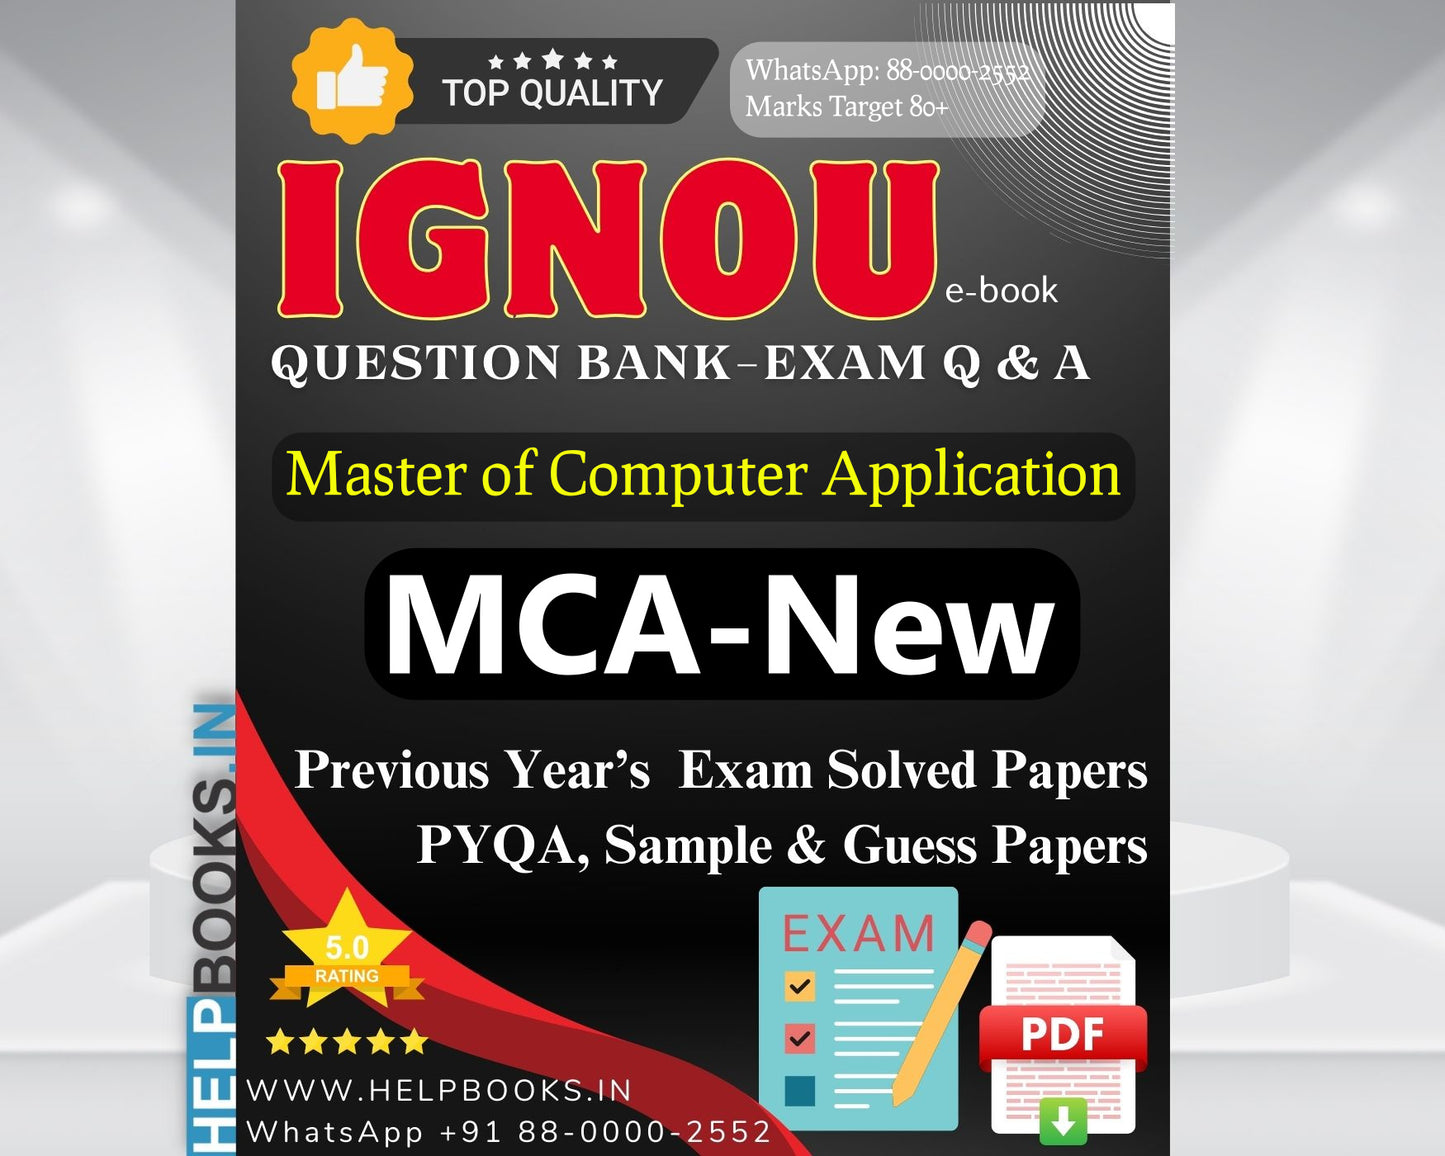 IGNOU MCA Exam Papers: 5 Solved Papers From Previous Years Examination